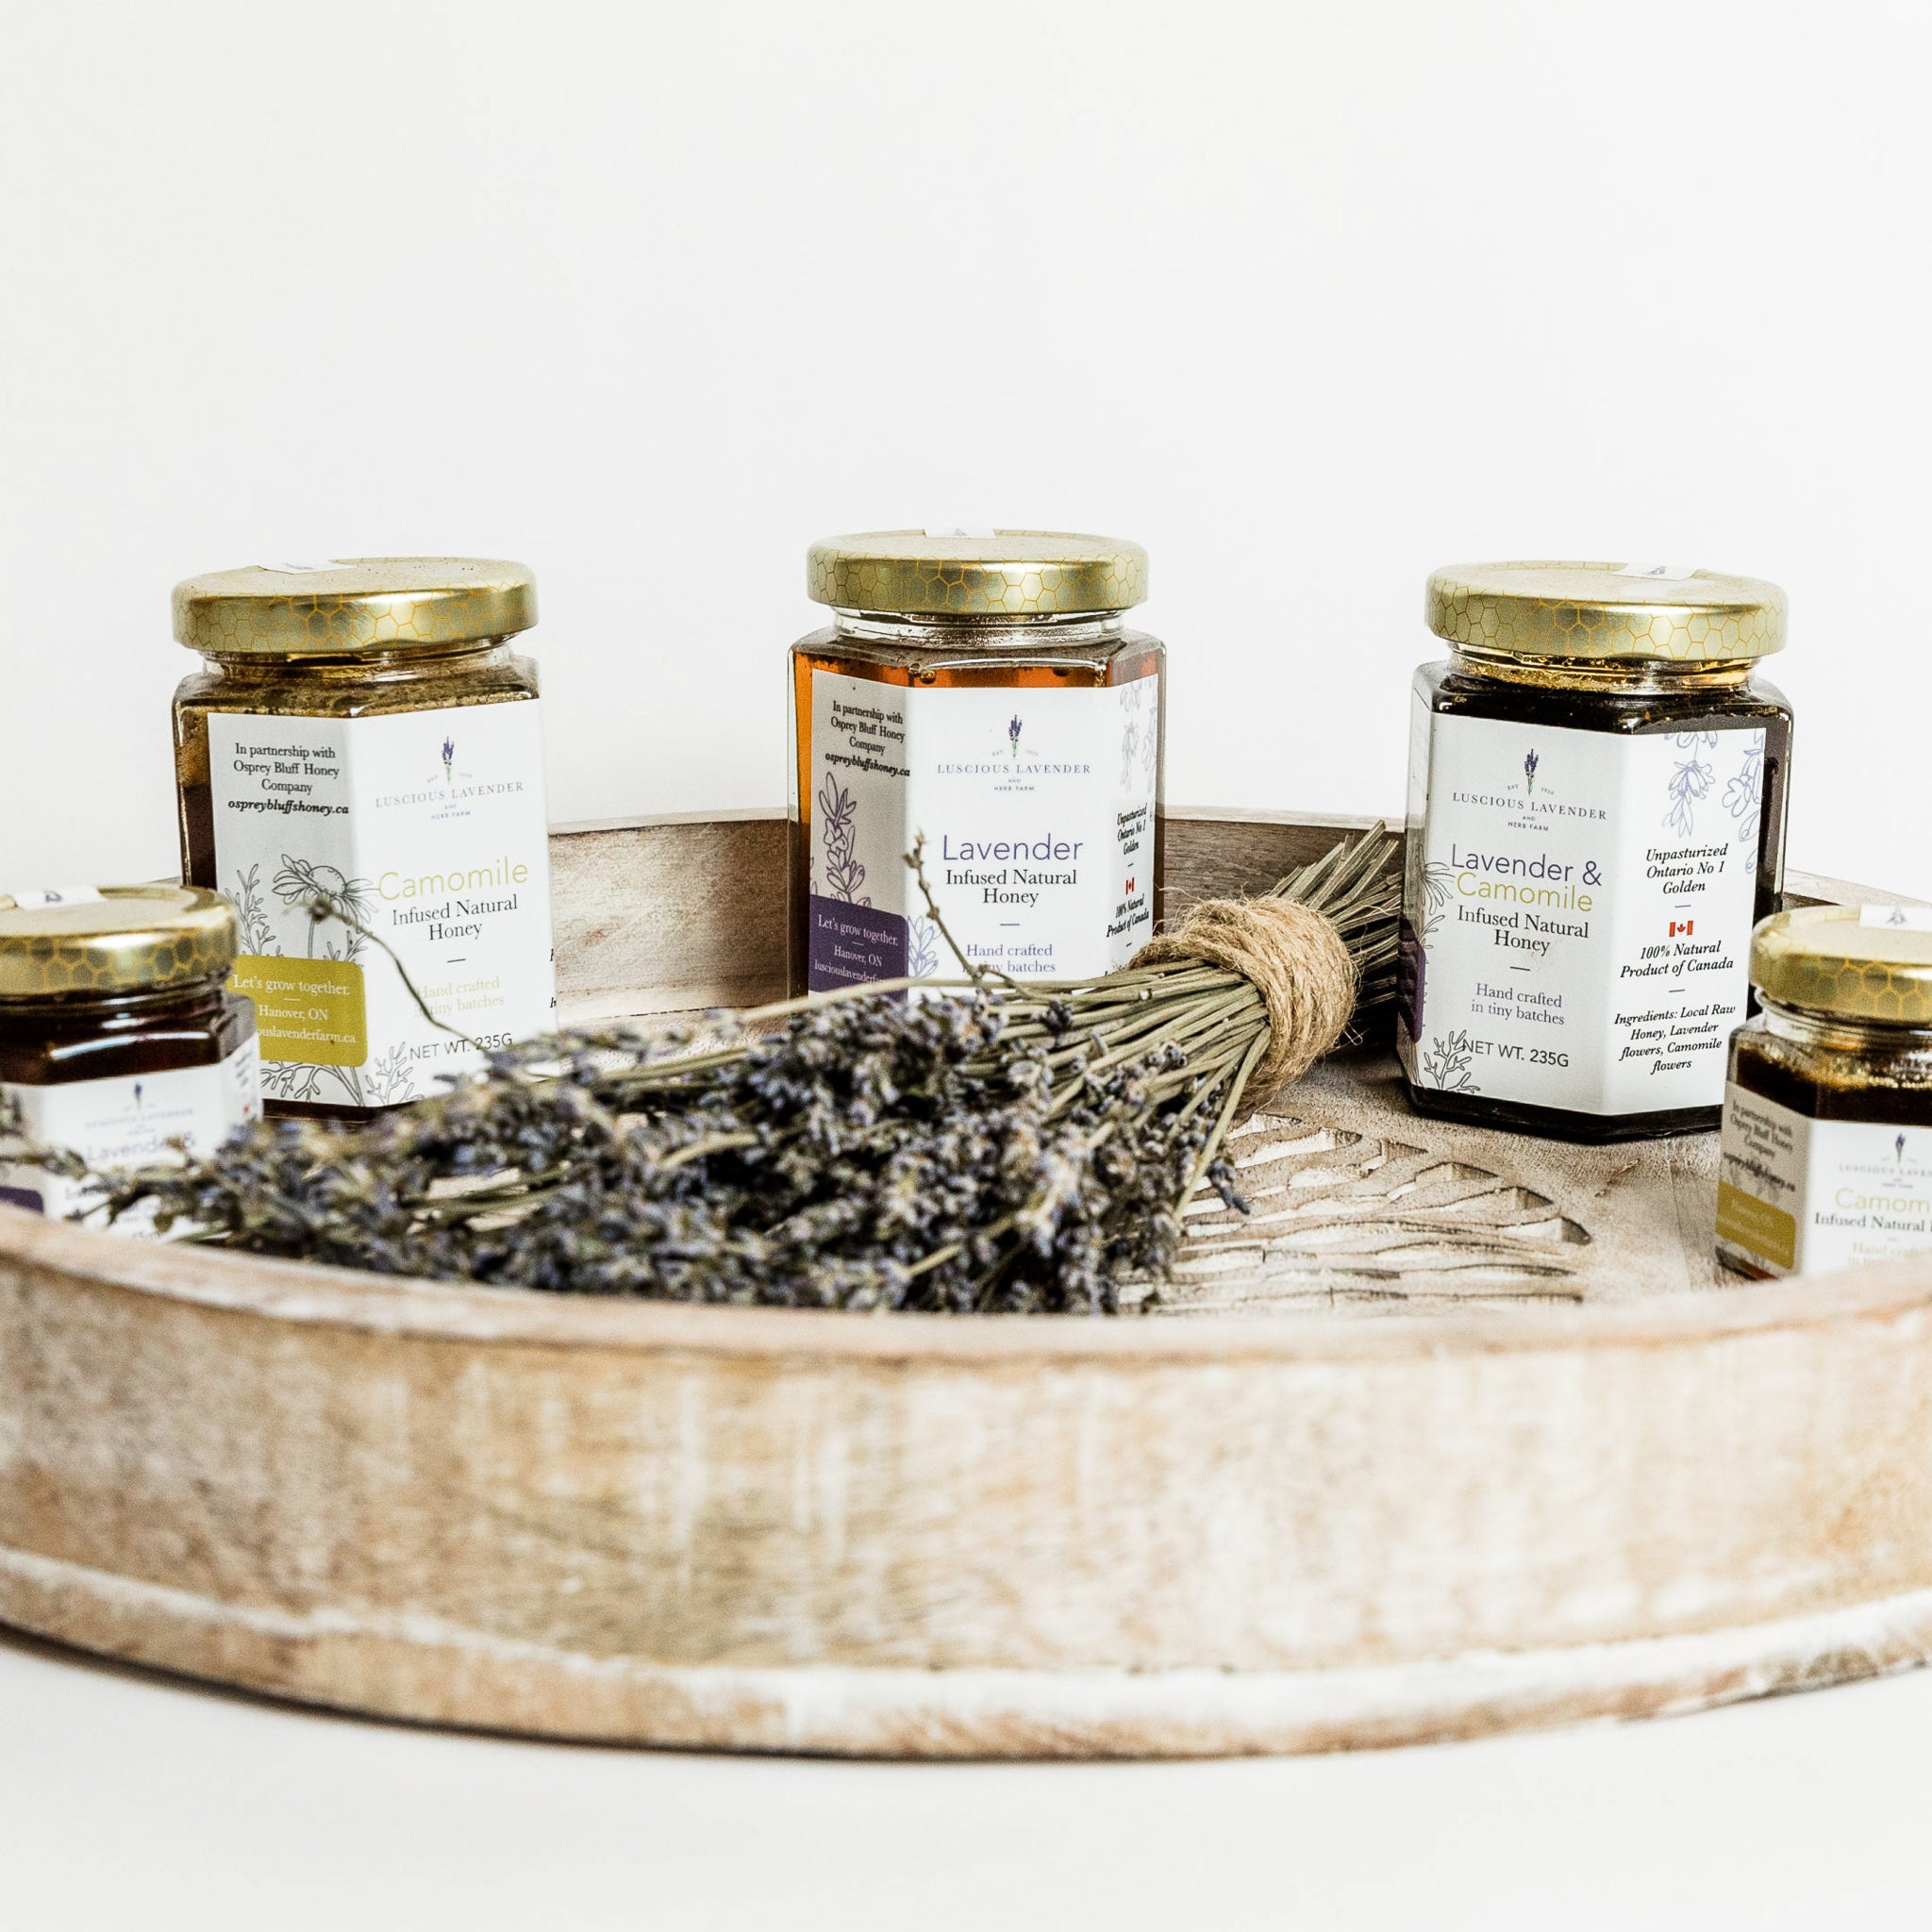 Lavender Camomile Honey on a wooden tray